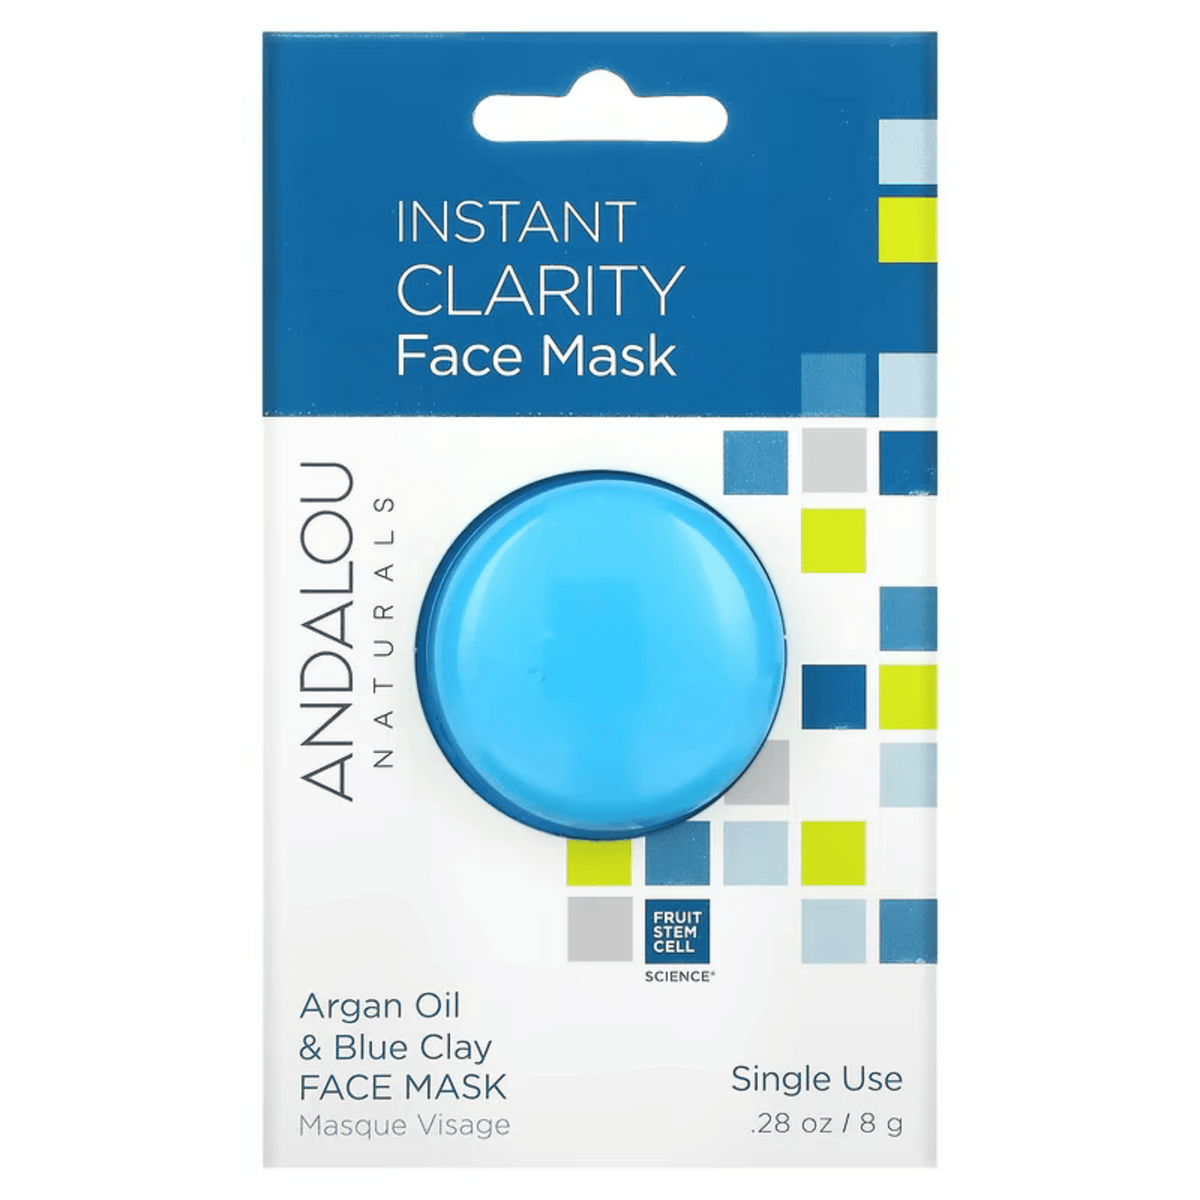 Primary Image of Instant Clarity Face Mask Pod